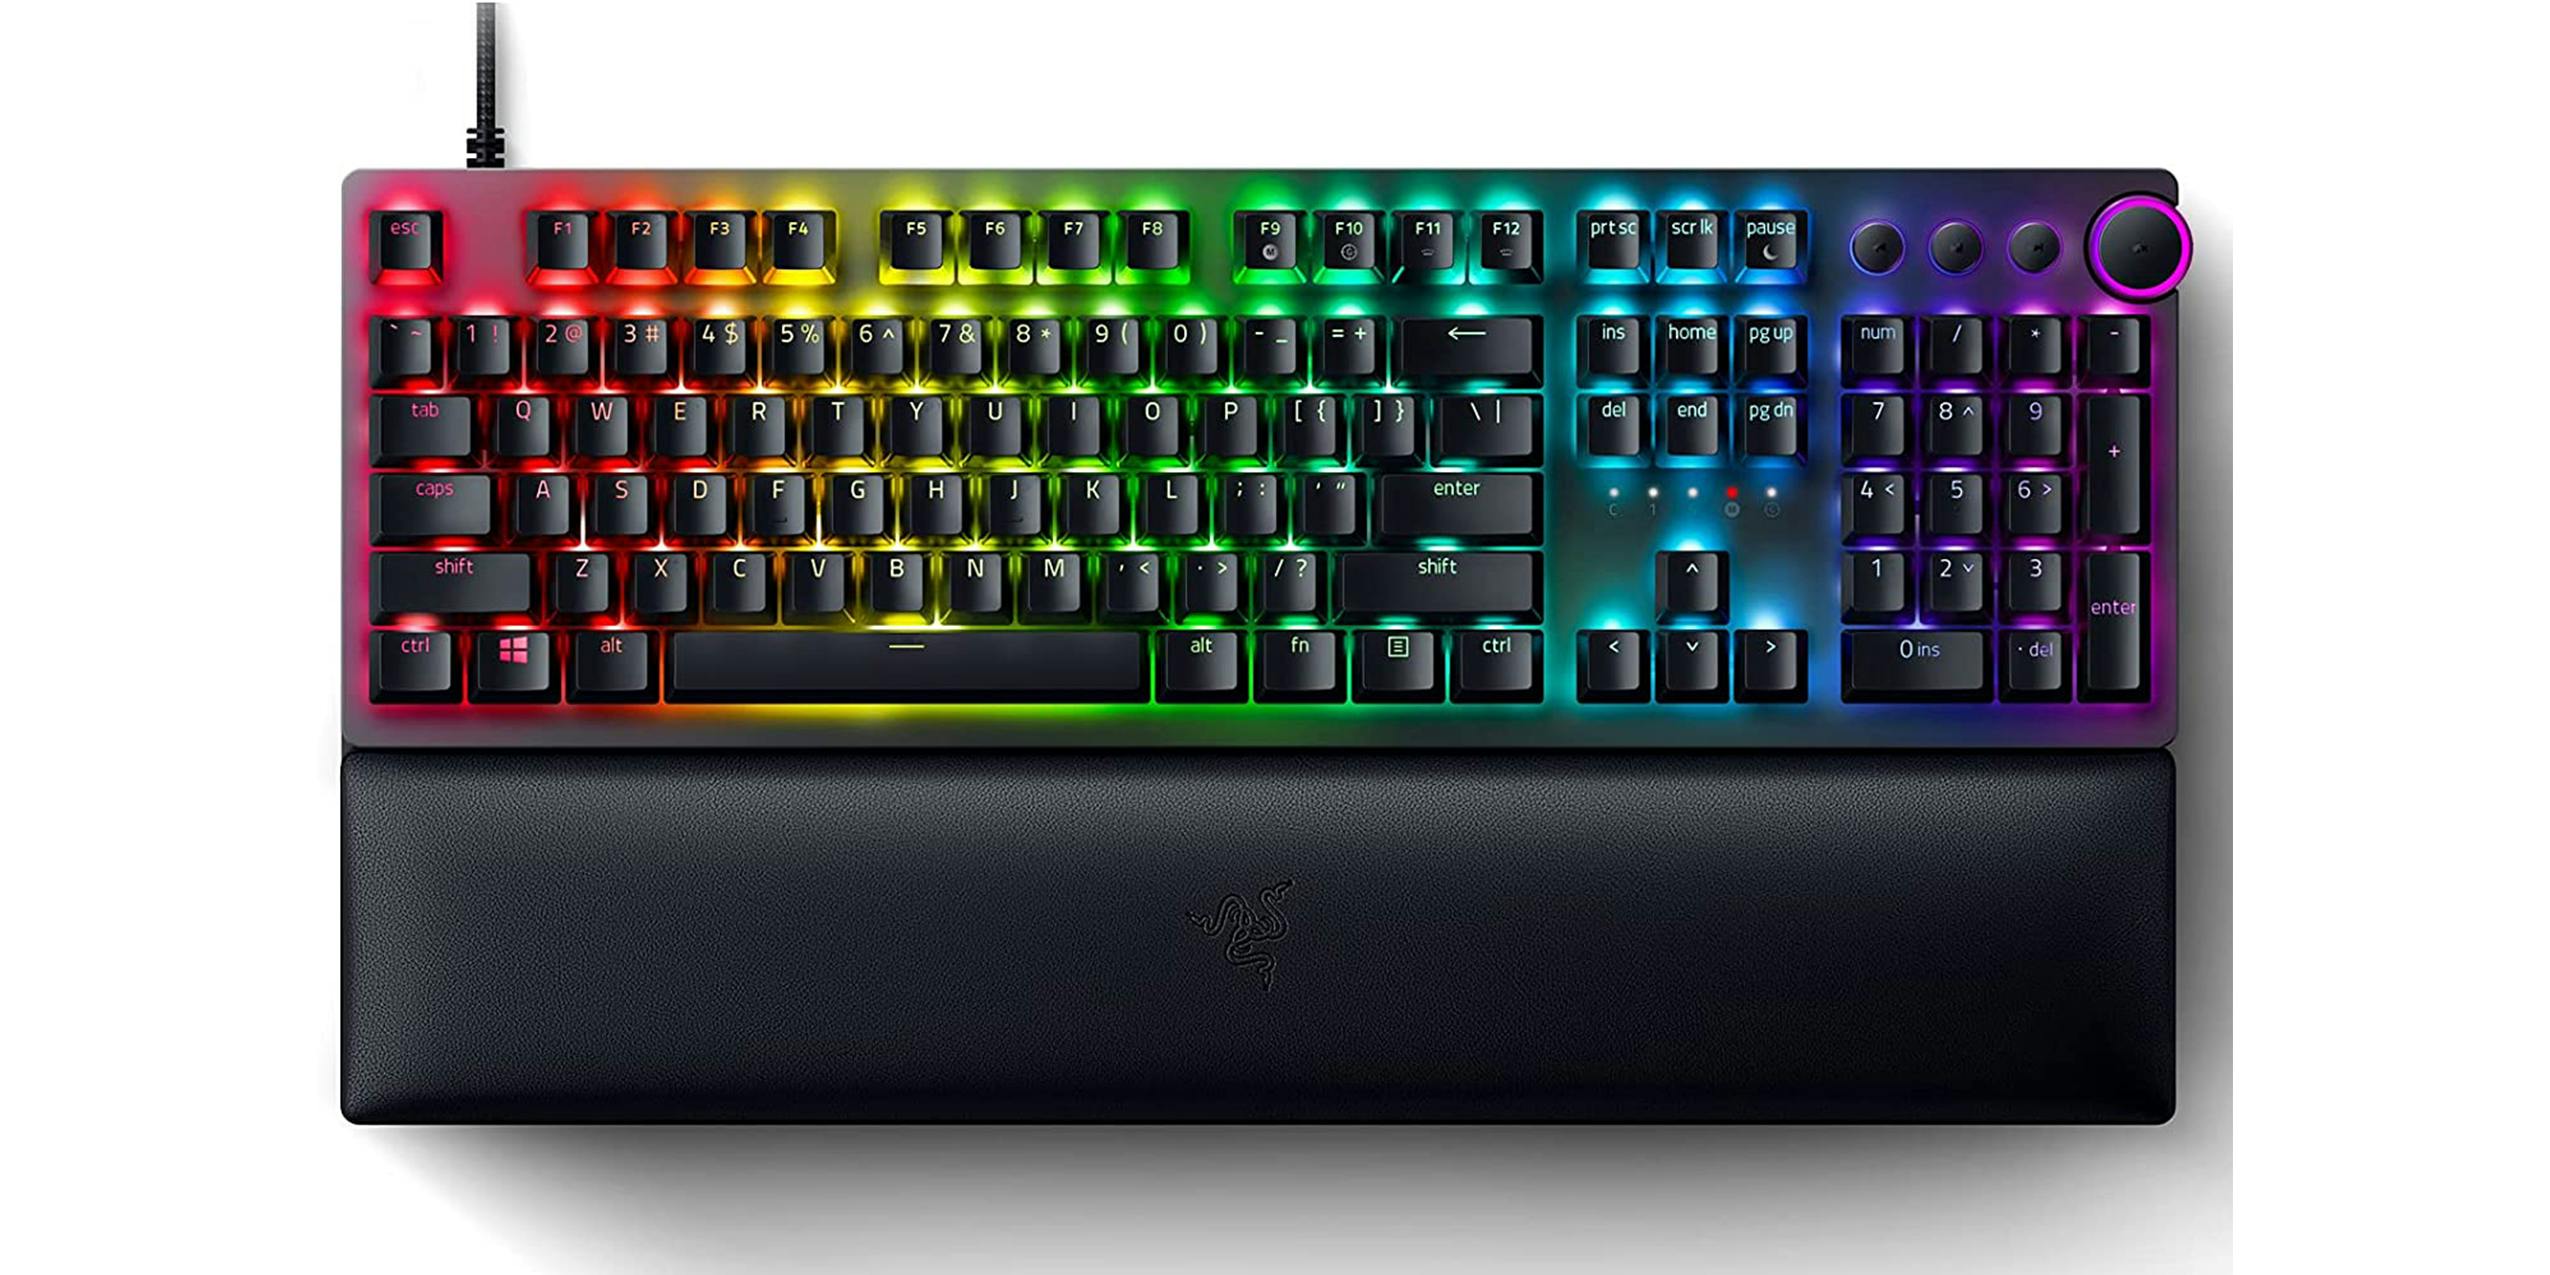 Razer Keyboard with a multi-color backlight display.